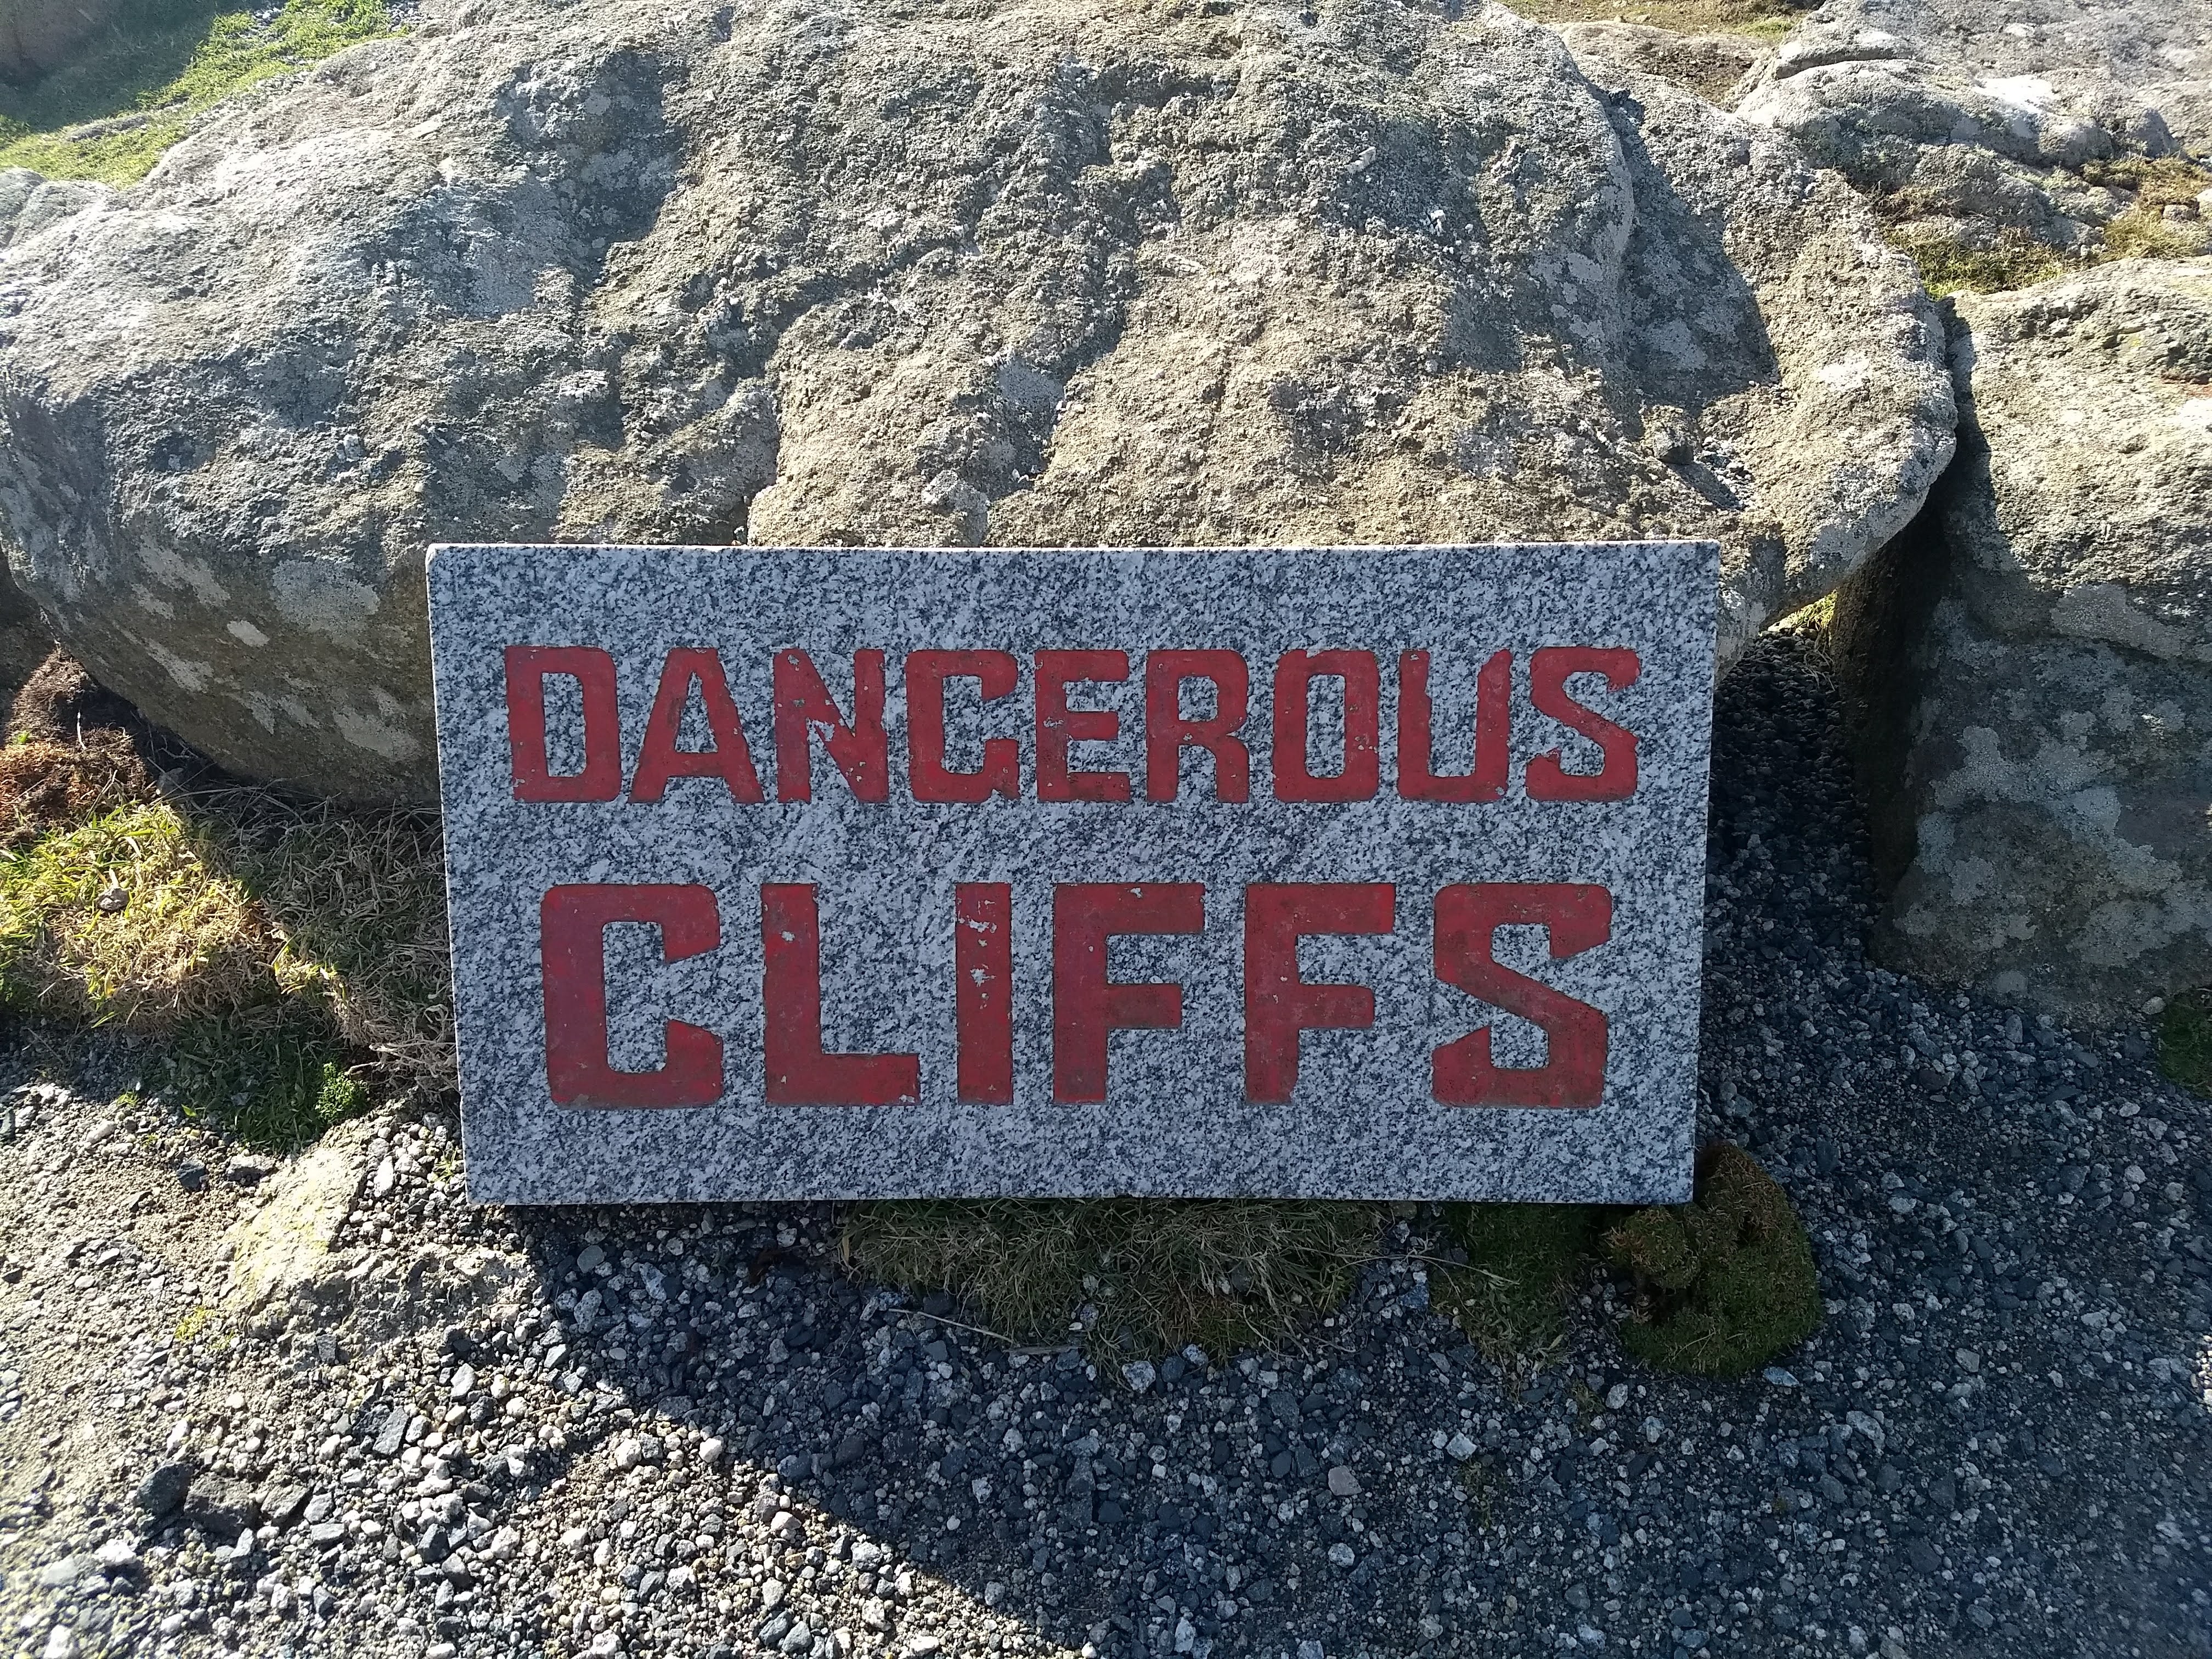 Dangerous cliffs... Photo licensed under the Creative CommonsAttribution-Share Alike 3.0 Unported license